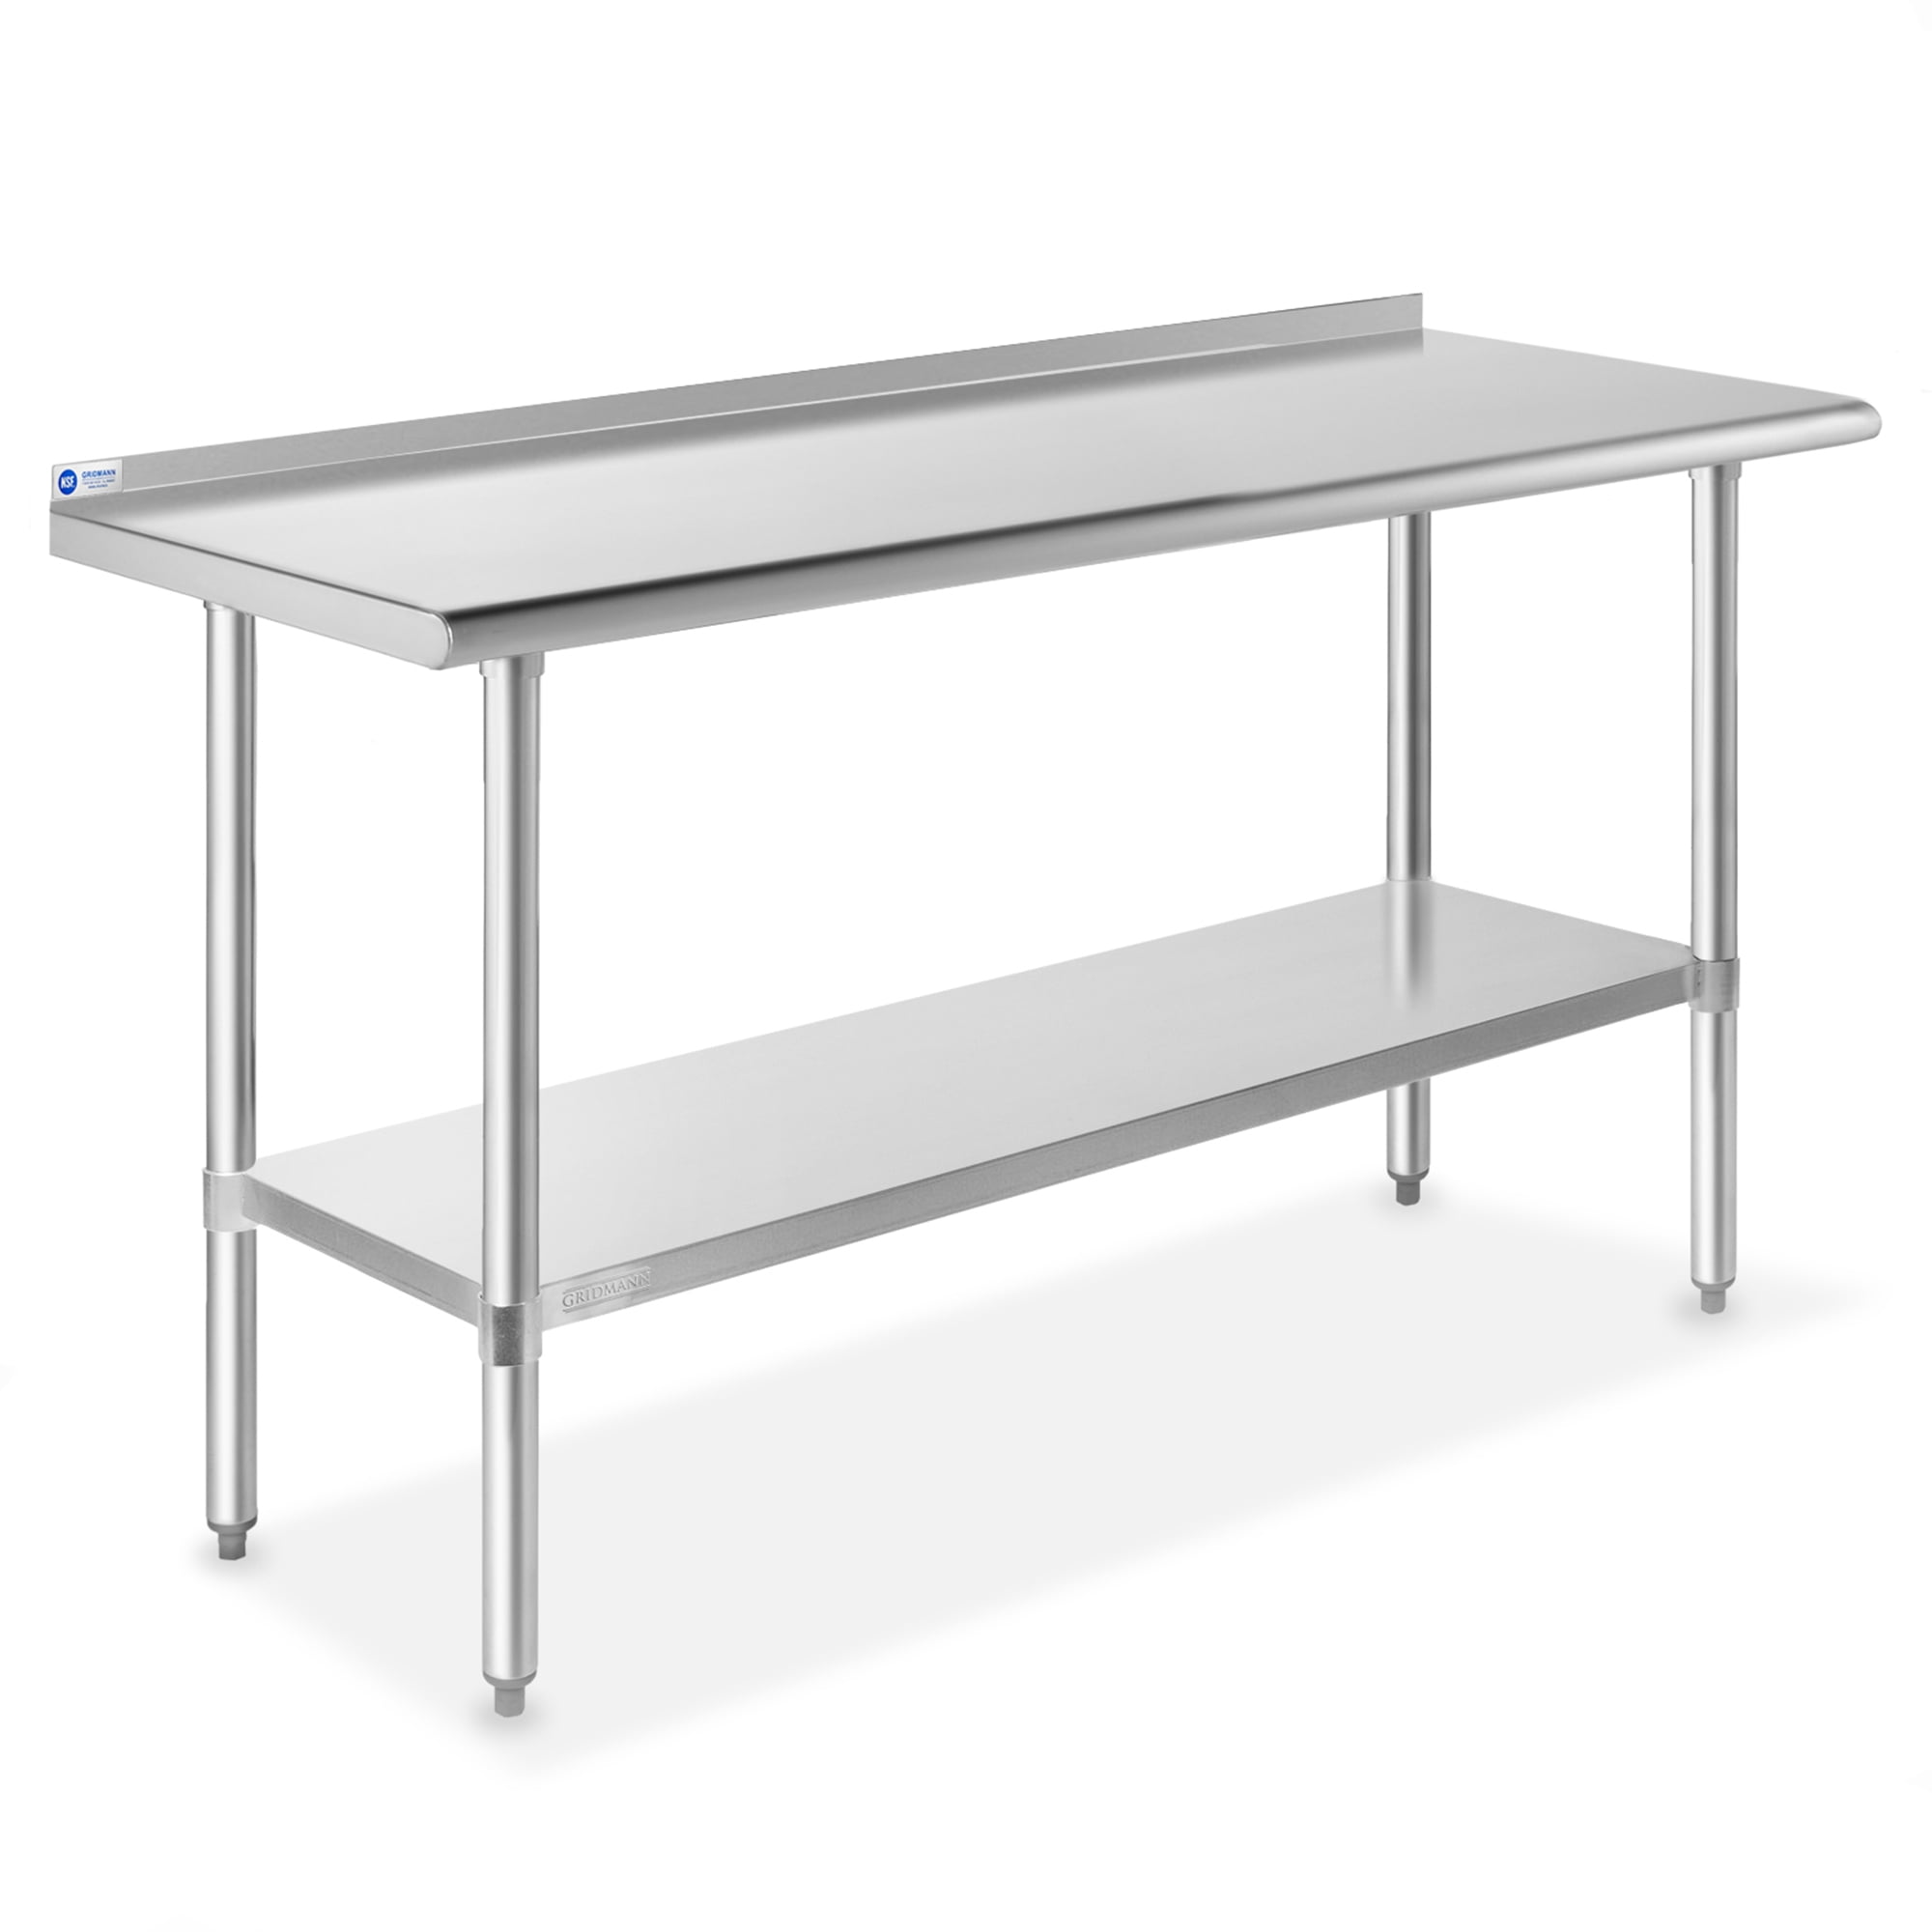 Office ETL or NSF Certified. EquipmentBlvd 24W Economy Commercial Grade Flat Top Work Table with Stainless Steel Top for Restaurant Kitchen or Garage Home 24W x 12L x 35H 